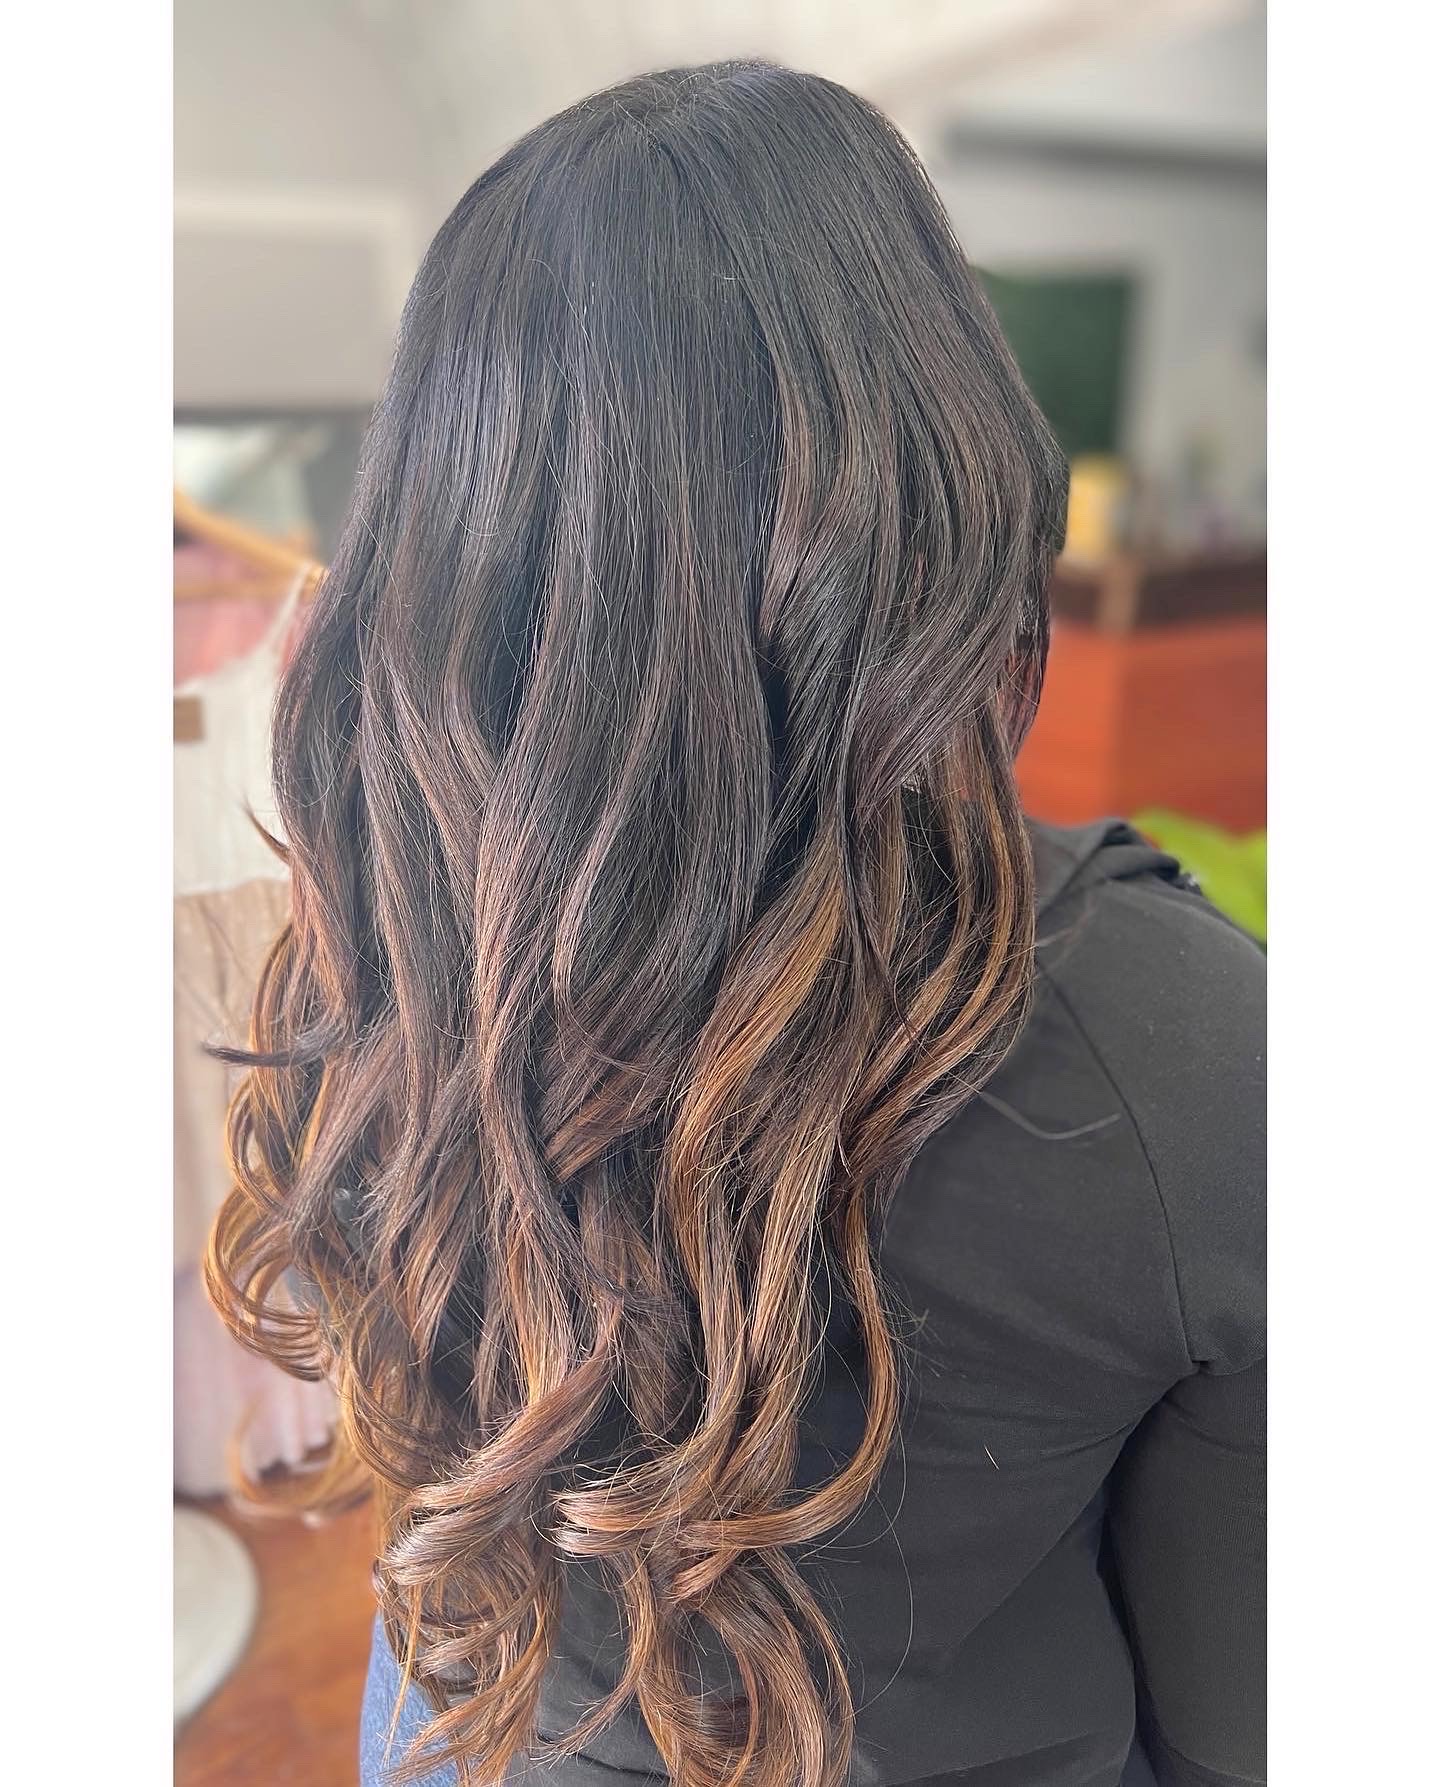 Best Hair Extension Salon Clearwater | Dolled Up Salon